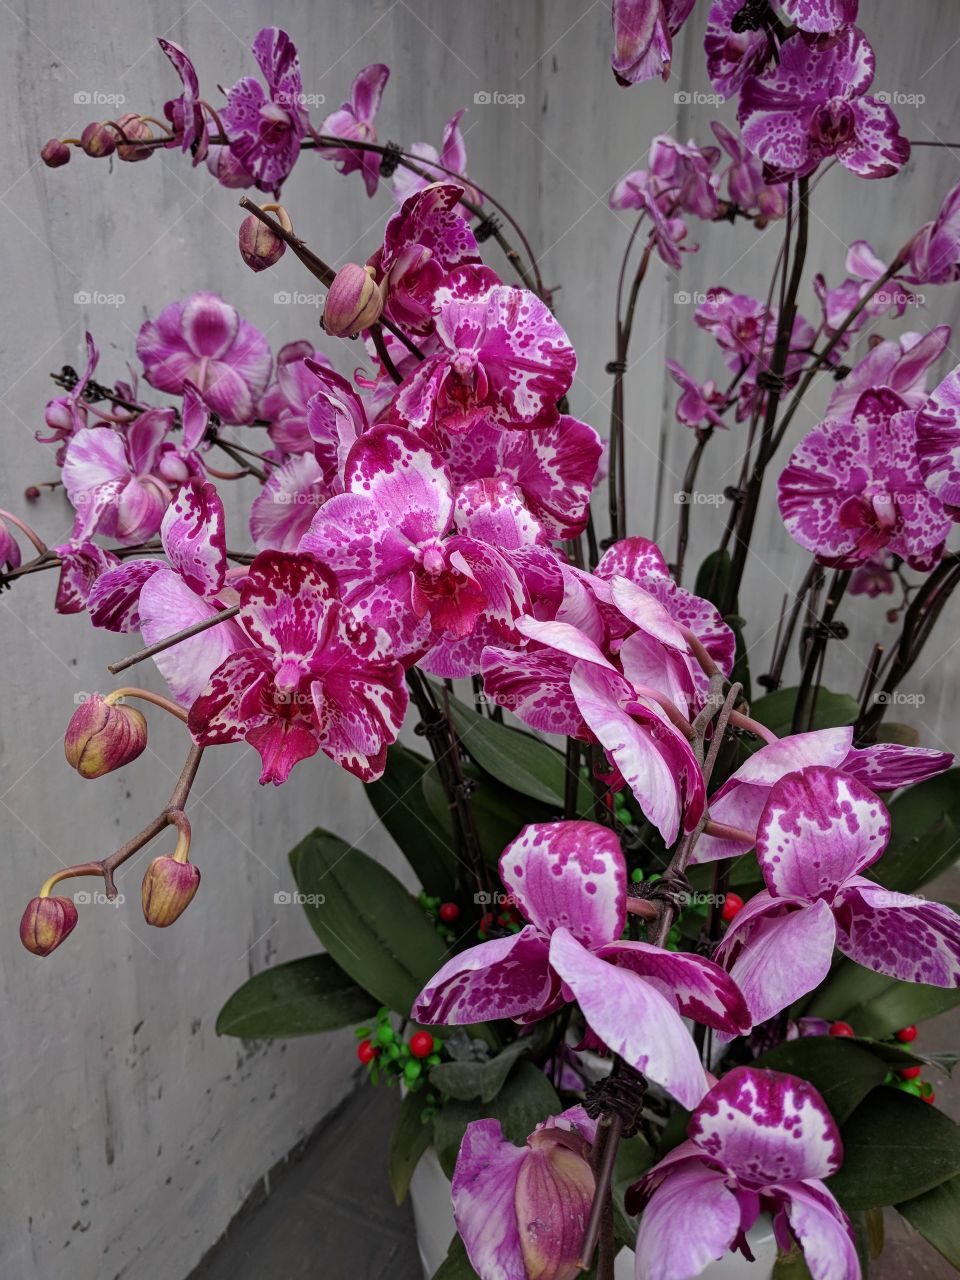 Such a wonderful color of orchid!